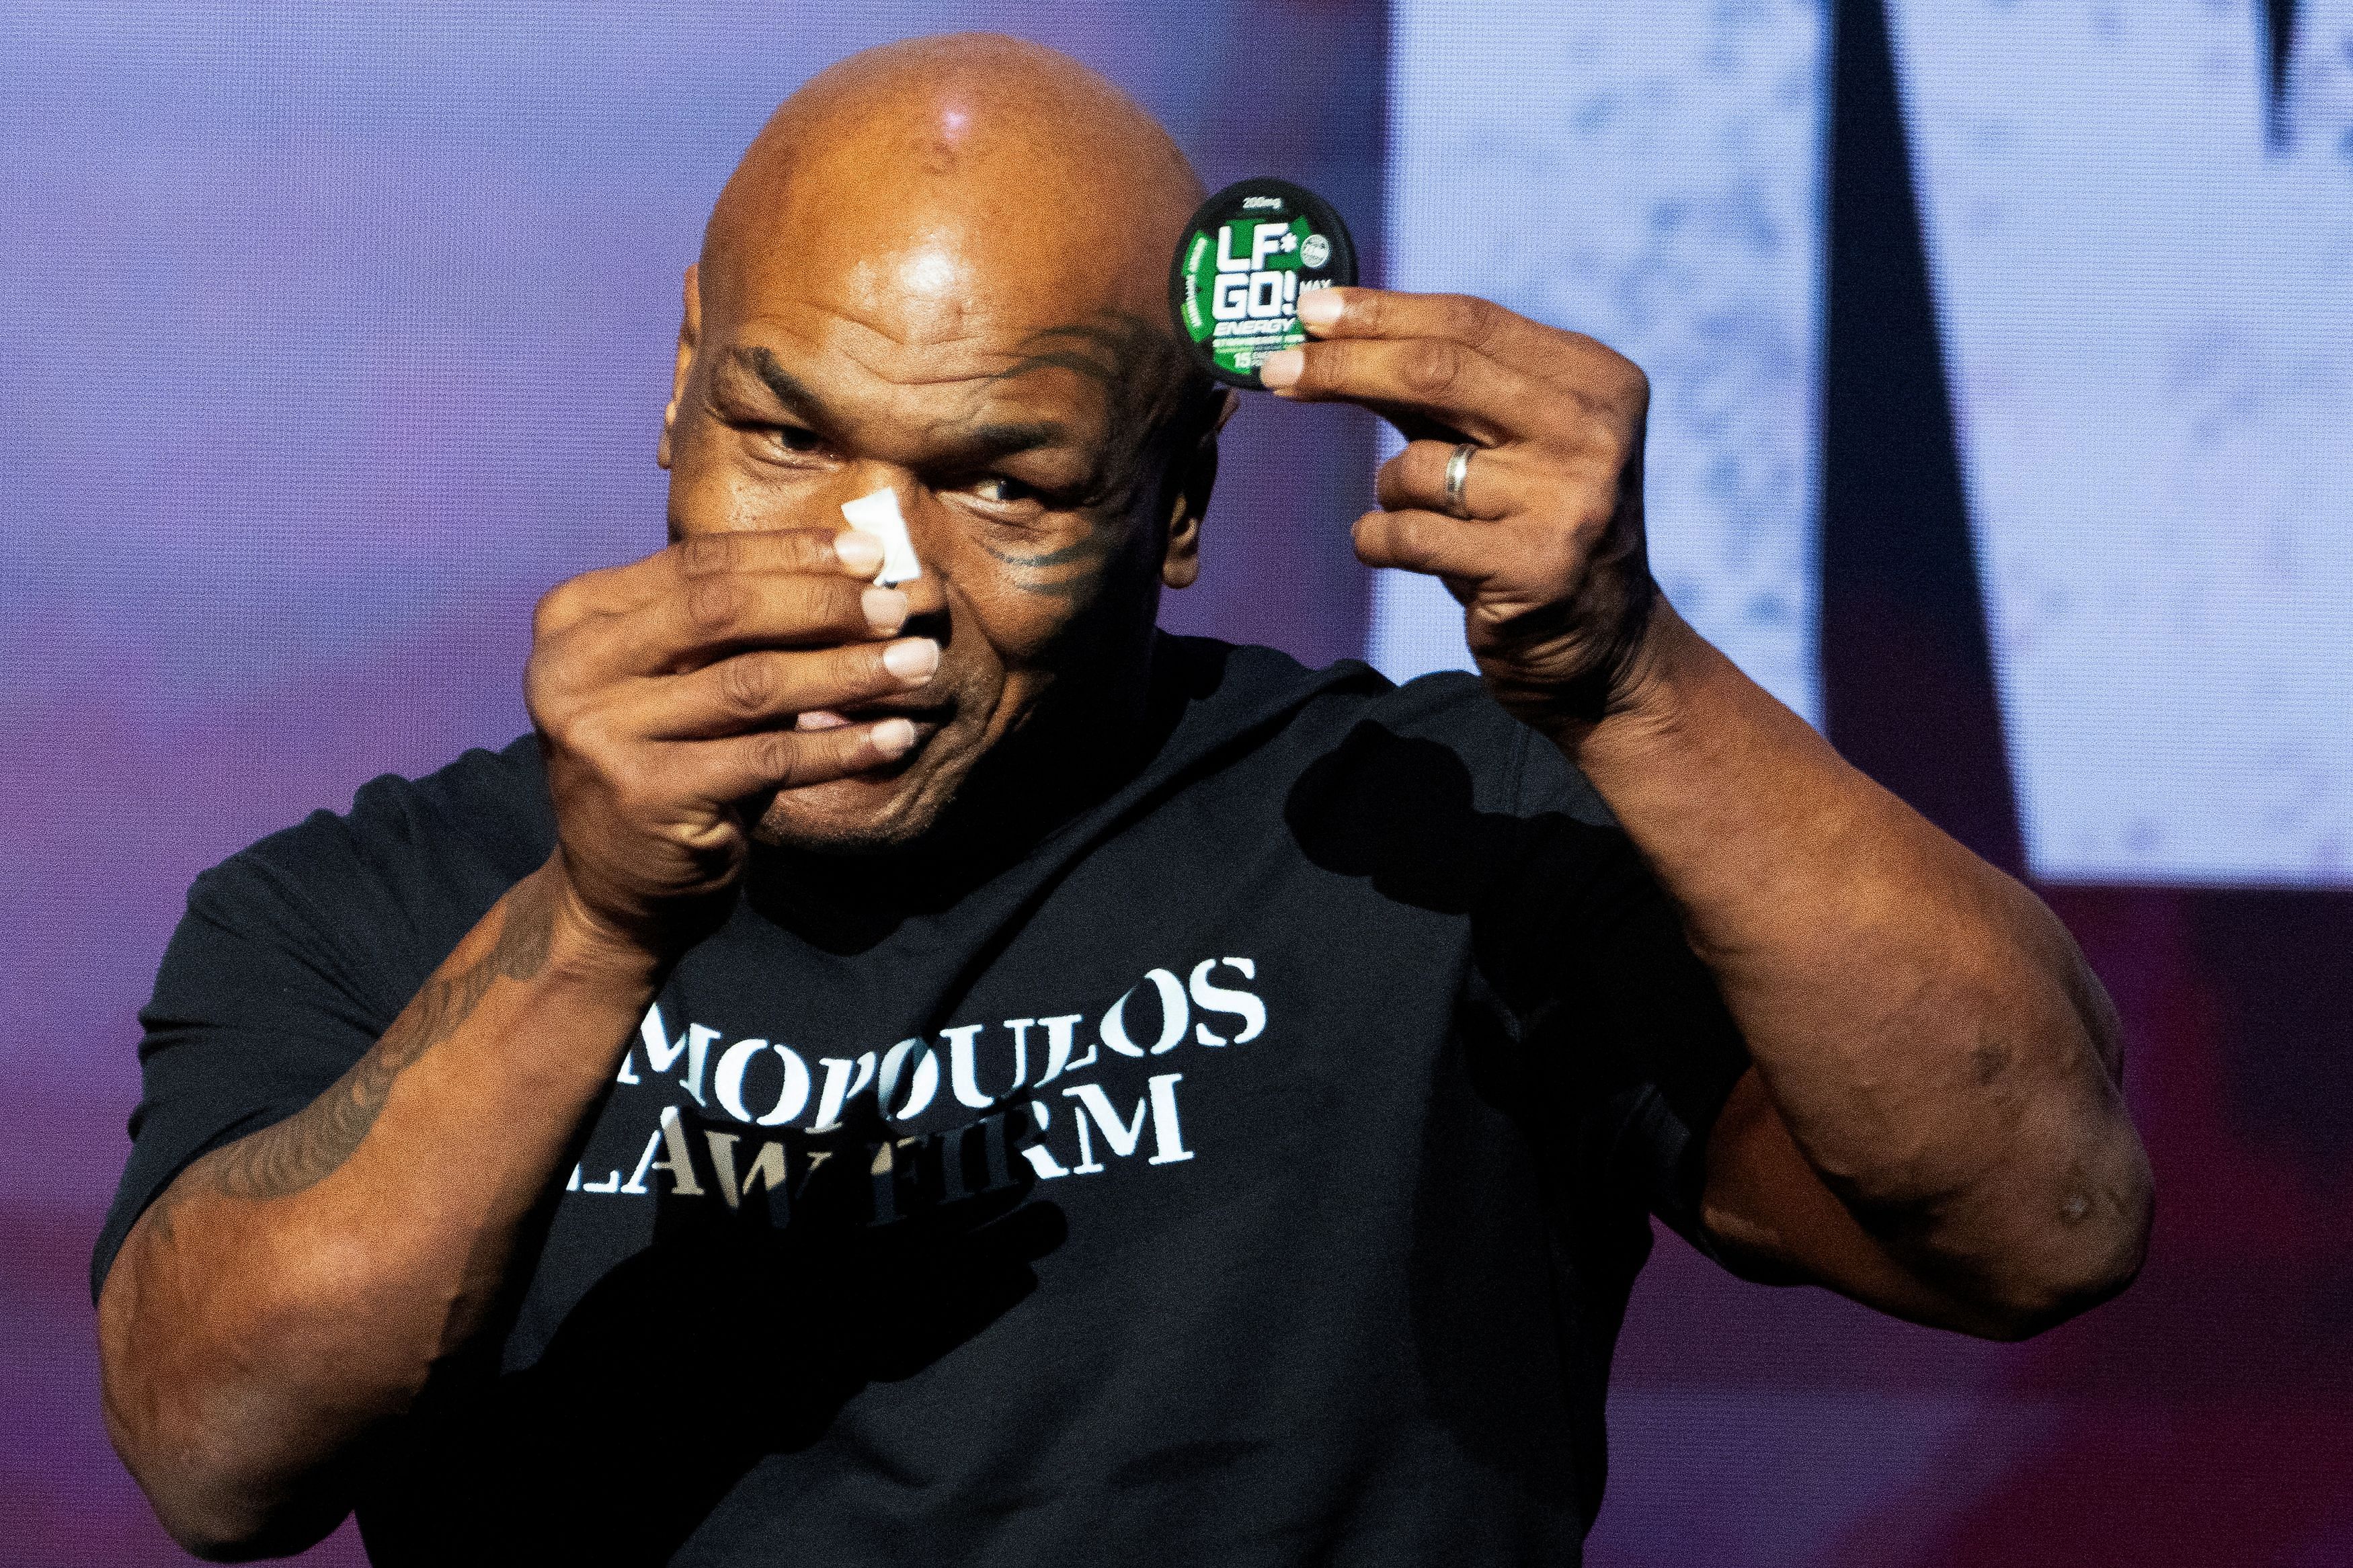 Boxer Mike Tyson promotes one of his energy products during a news conference, ahead of a sanctioned professional fight against Jake Paul which is set to take place at AT&T Stadium in Arlington, Texas on July 20, in New York City